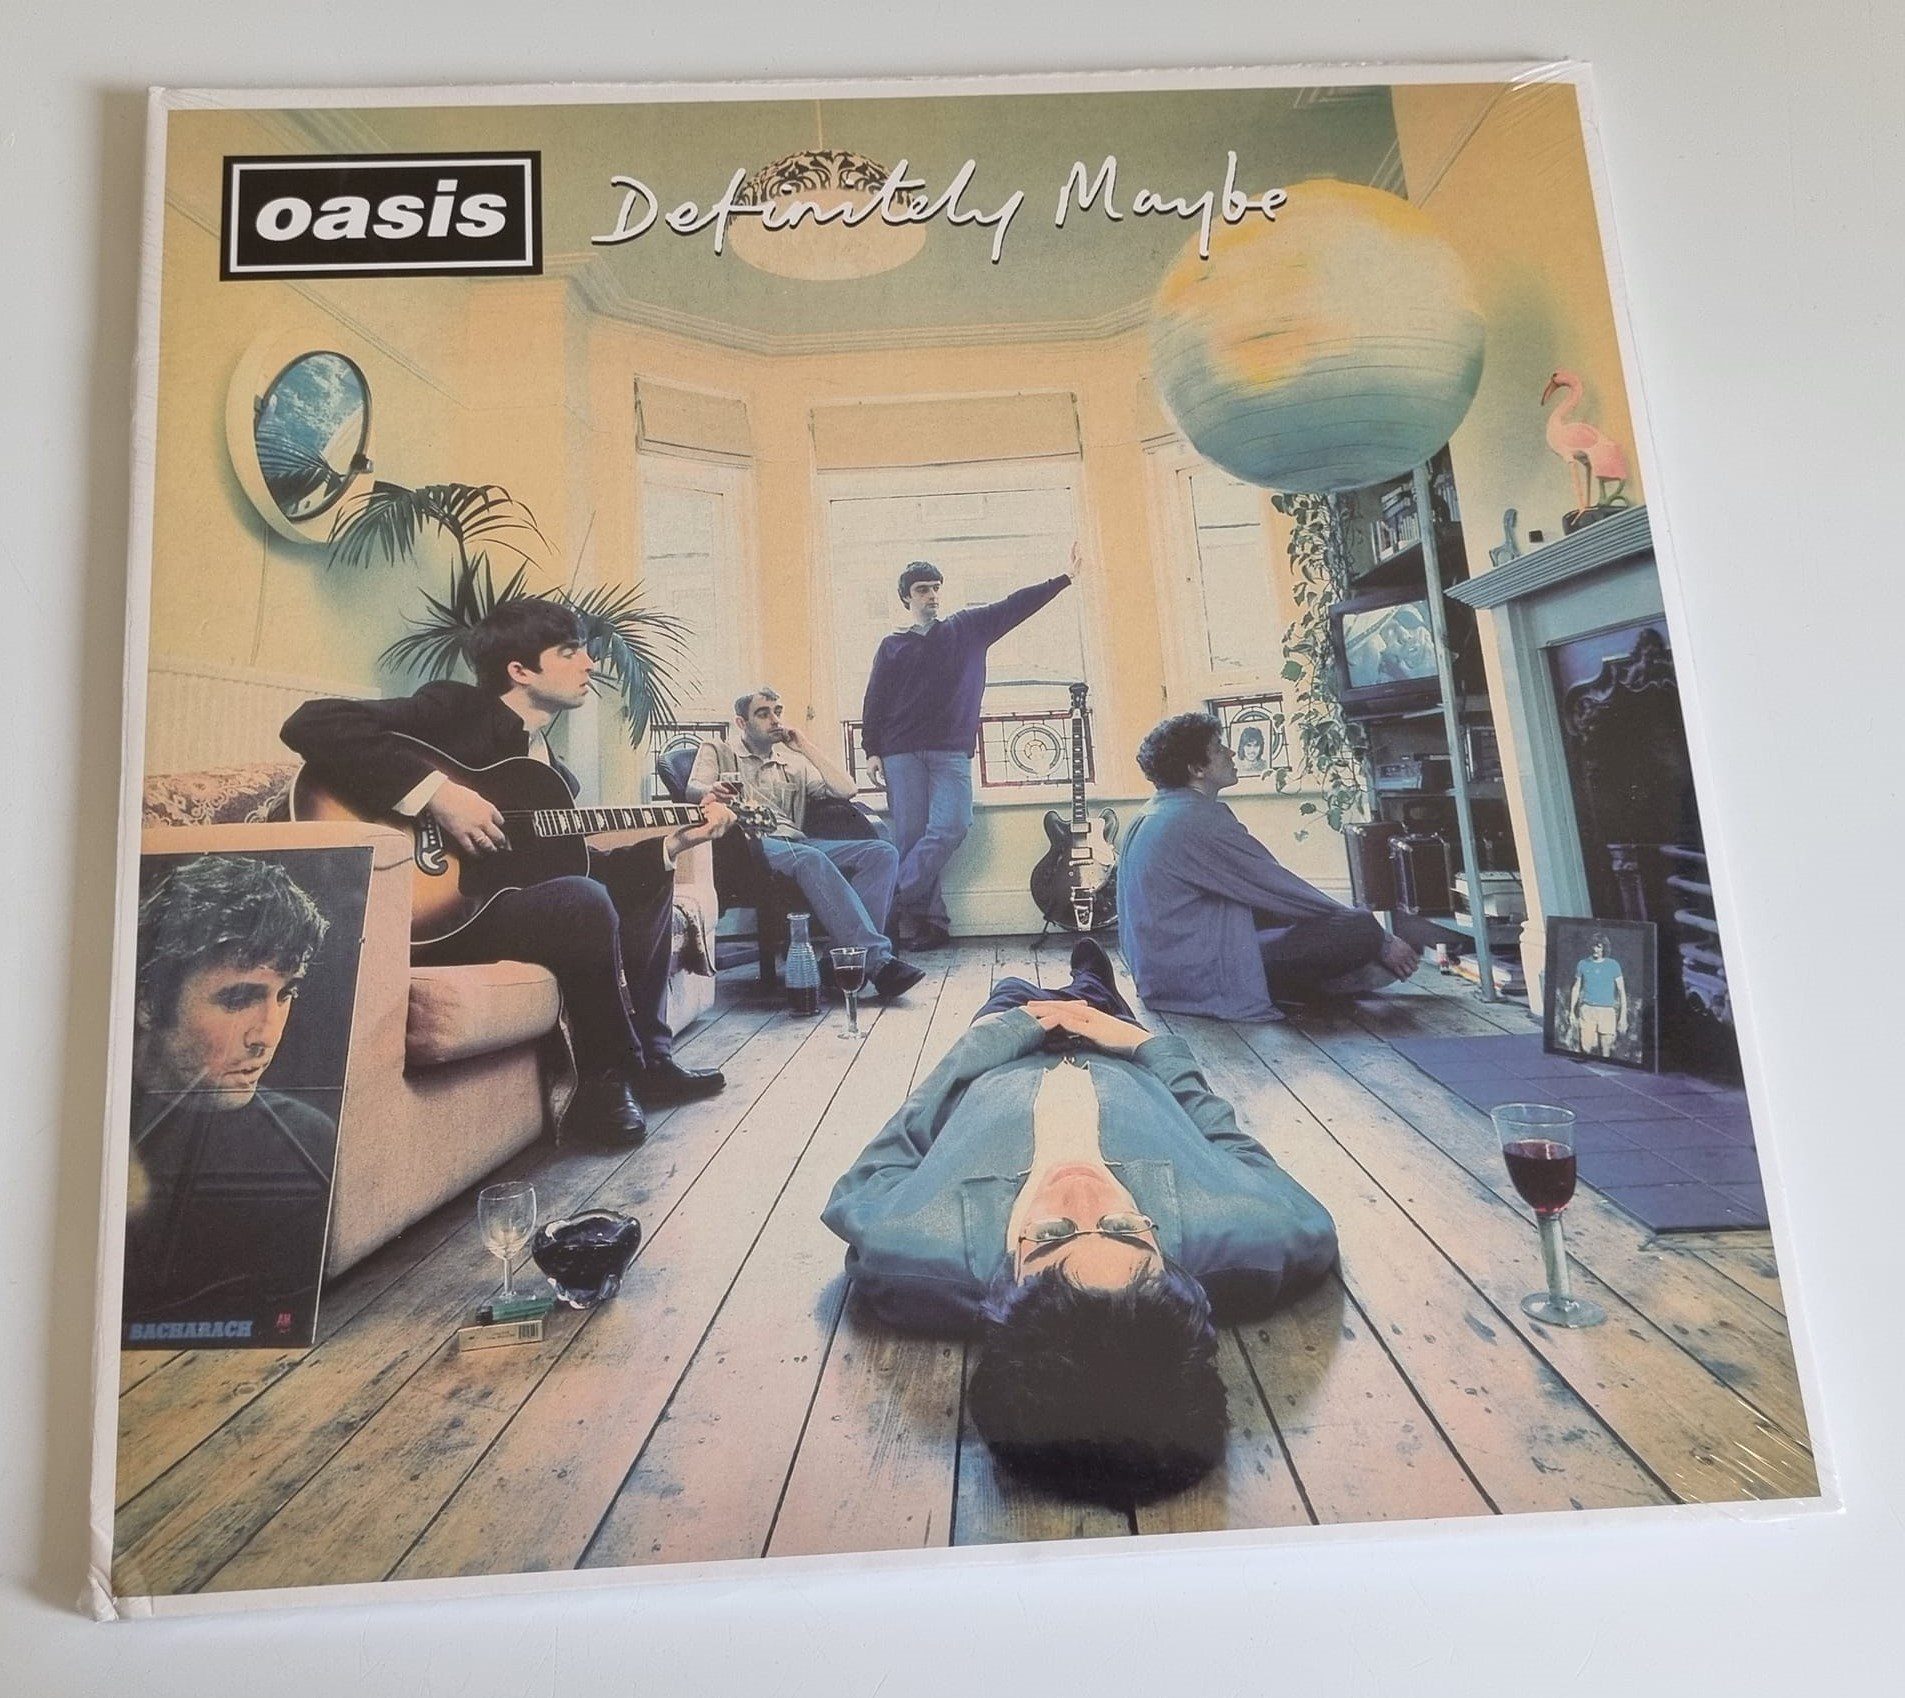 Oasis – Definitely Maybe 20th Anniversary Re-issue – LP Vinyl